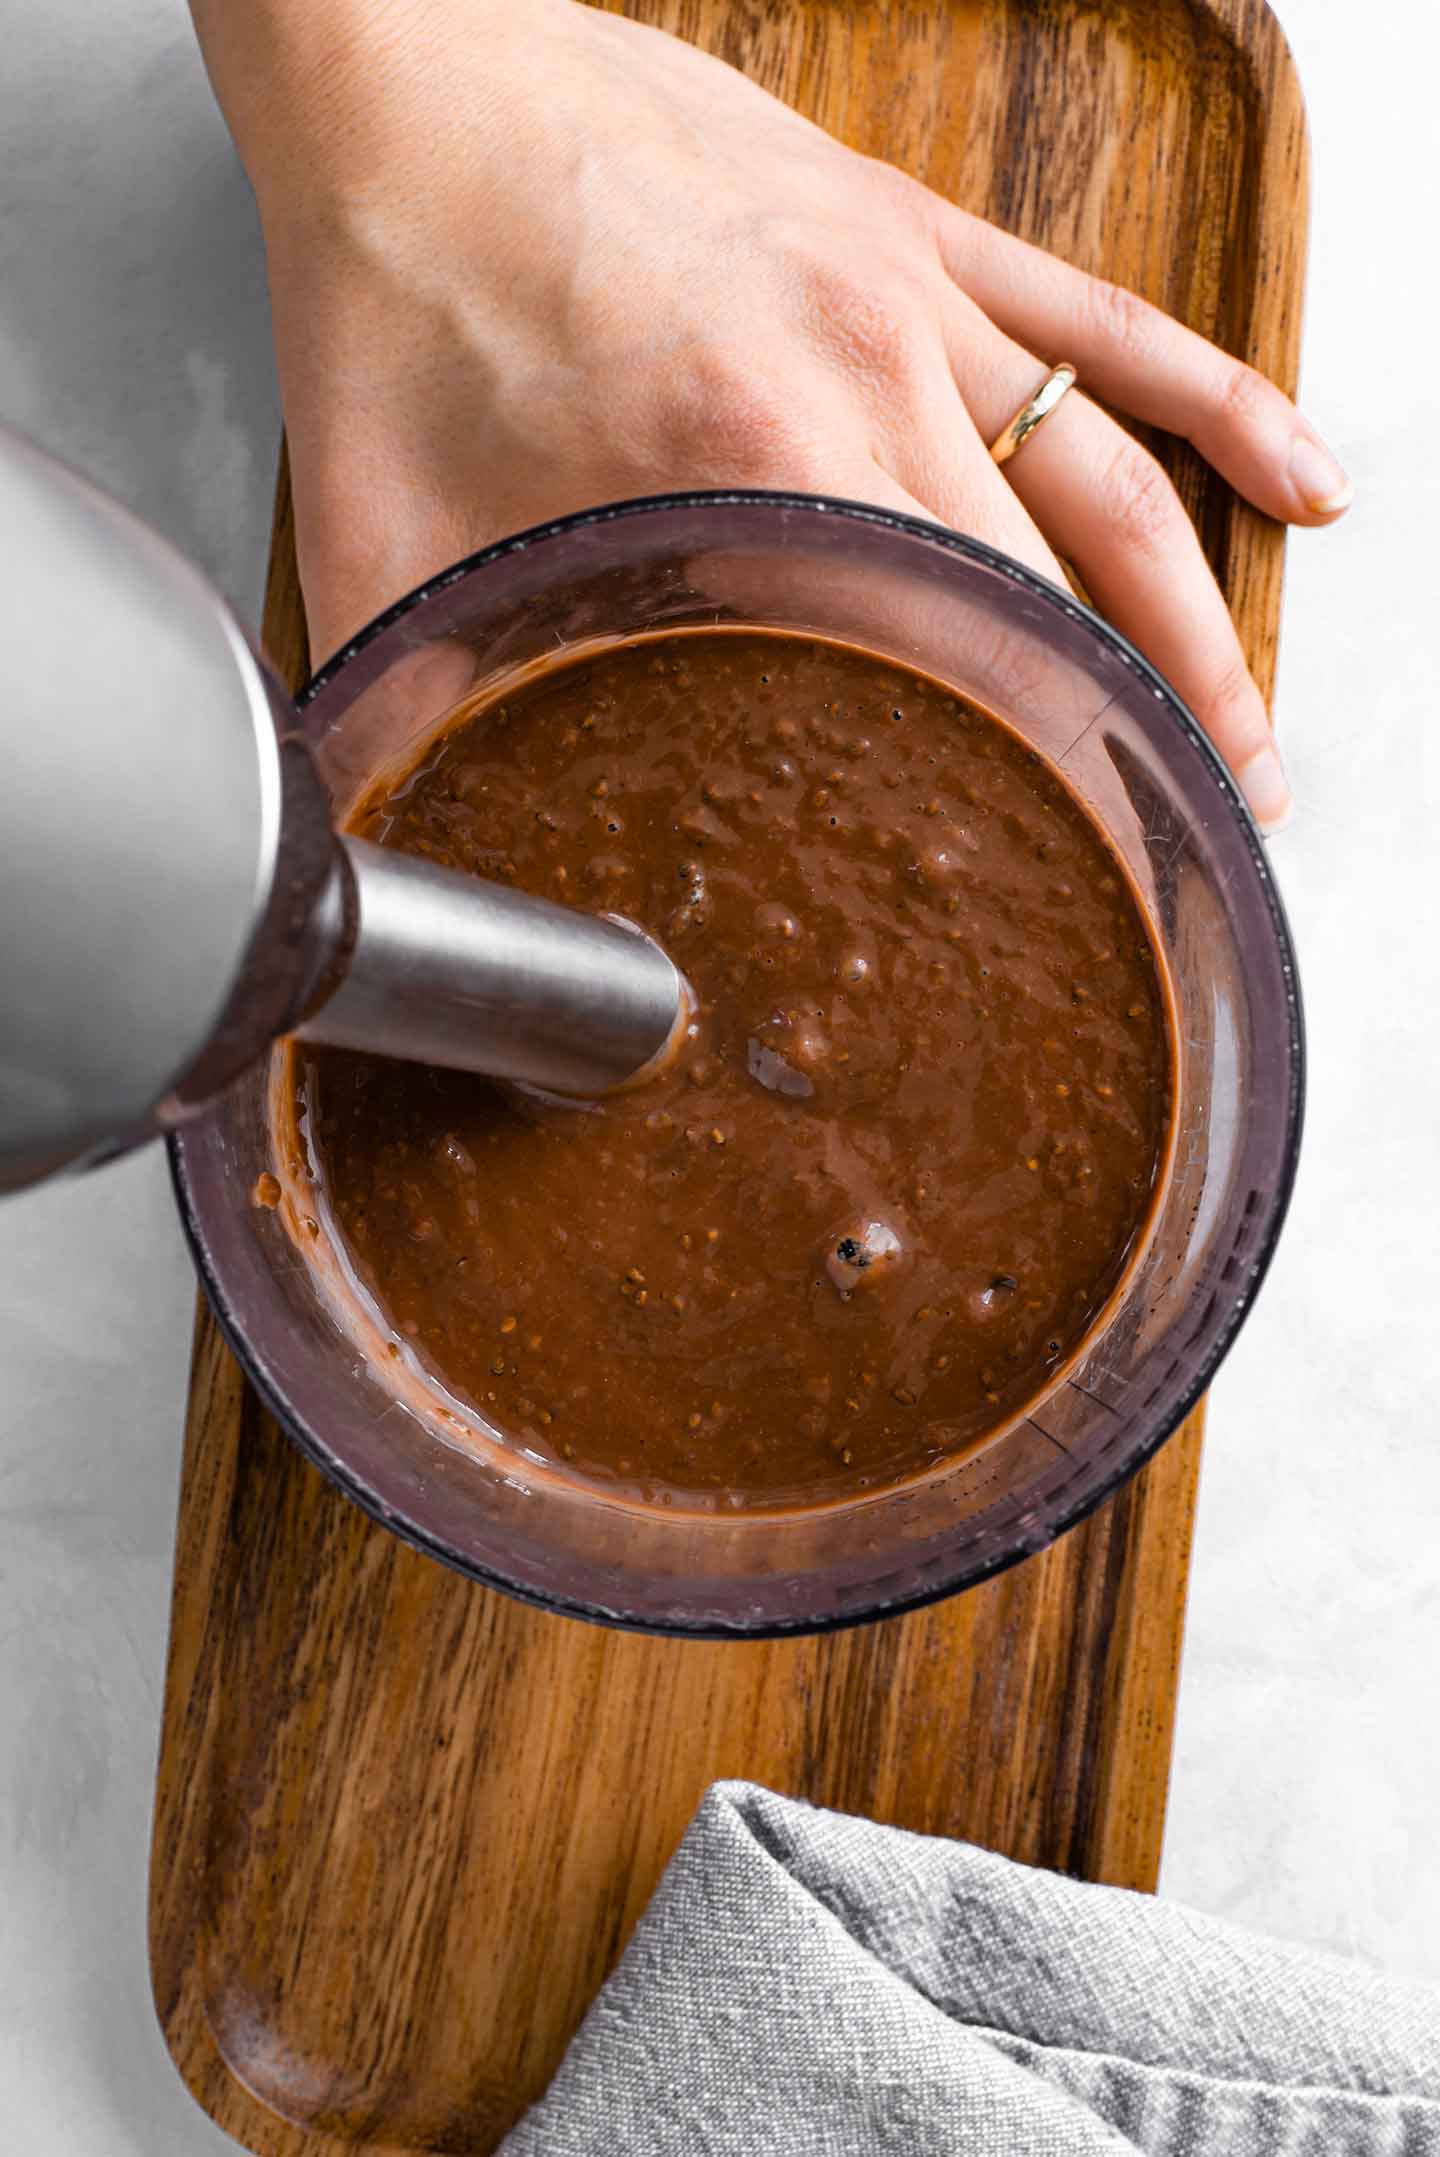 Top down view of quick chocolate pudding being blended using an immersion blender.